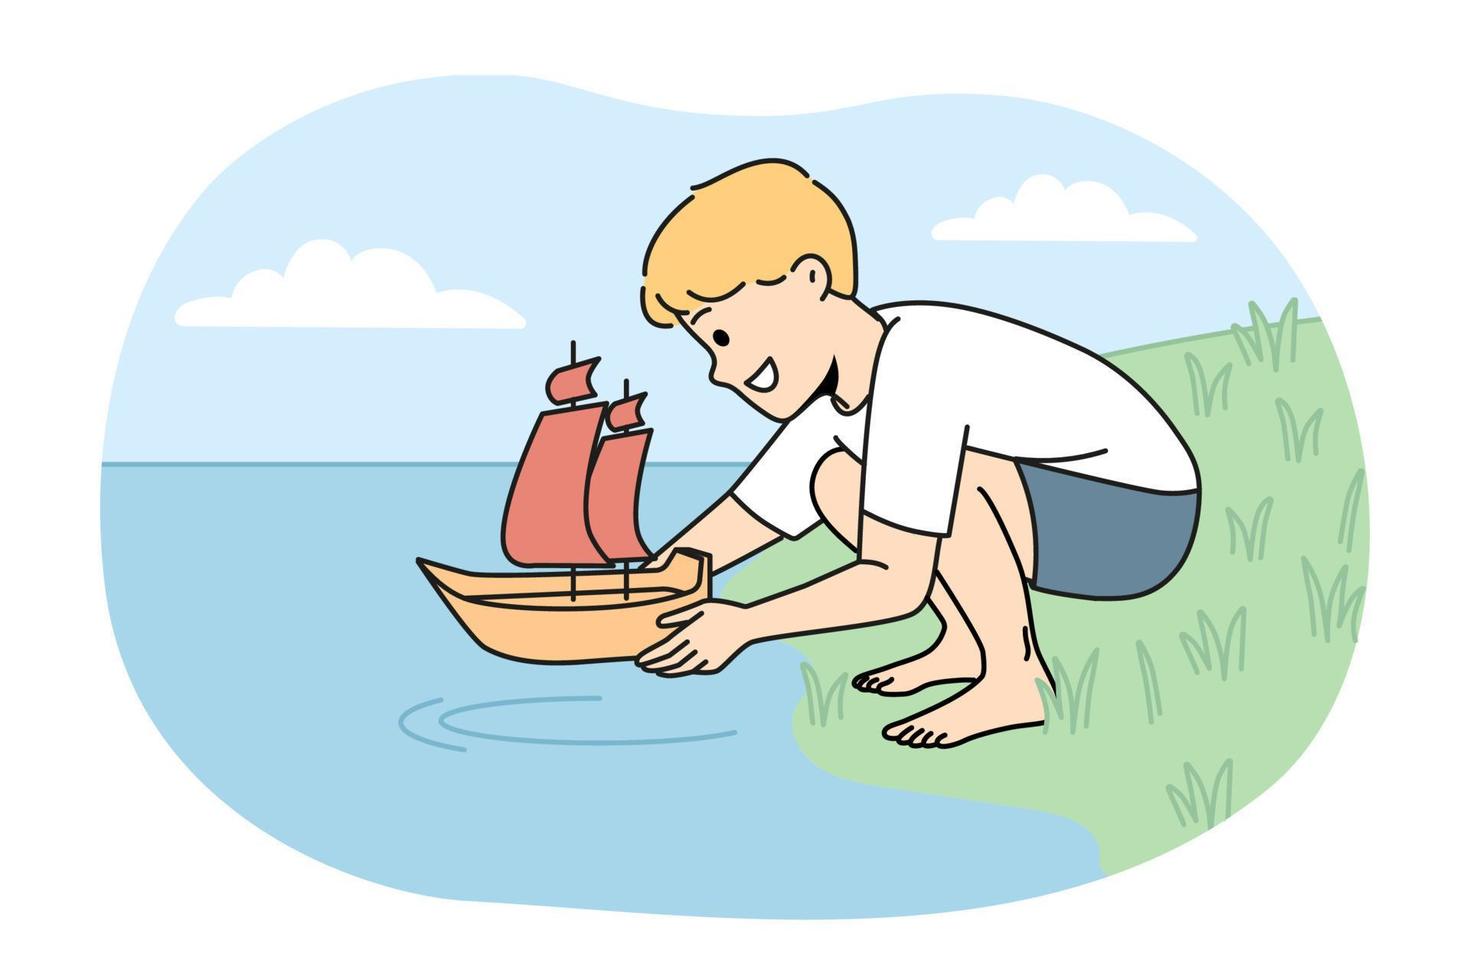 Happy boy child with toy boat playing on river bank. Smiling kid launch ship in water have fun on sea shore. Vector illustration.